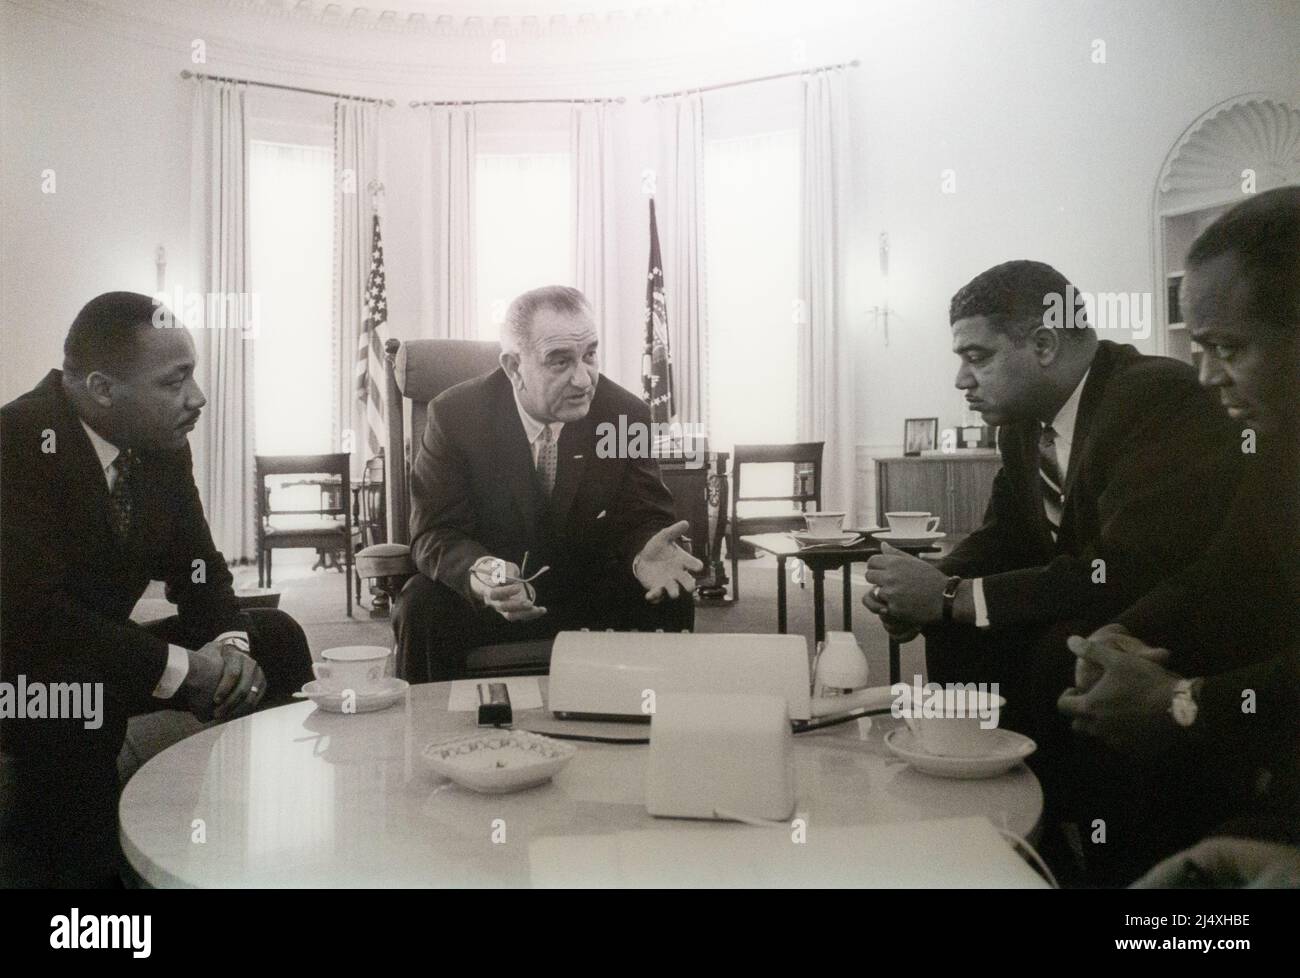 United States President Lyndon Baines Johnson LBJ speaking black civil rights leaders in the Oval Office taken on January 18, 1964 by Yoichi Okamoto, President Lyndon B. Johnson meets with a group of civil rights leaders. Among the group are the Rev. Dr. Martin Luther King, Jr. of the Southern Christian Leadership Conference (left), Whitney M. Young, Jr. of the National Urban League (right), and James Farmer of the Congress of Racial Equality (far right). Stock Photo